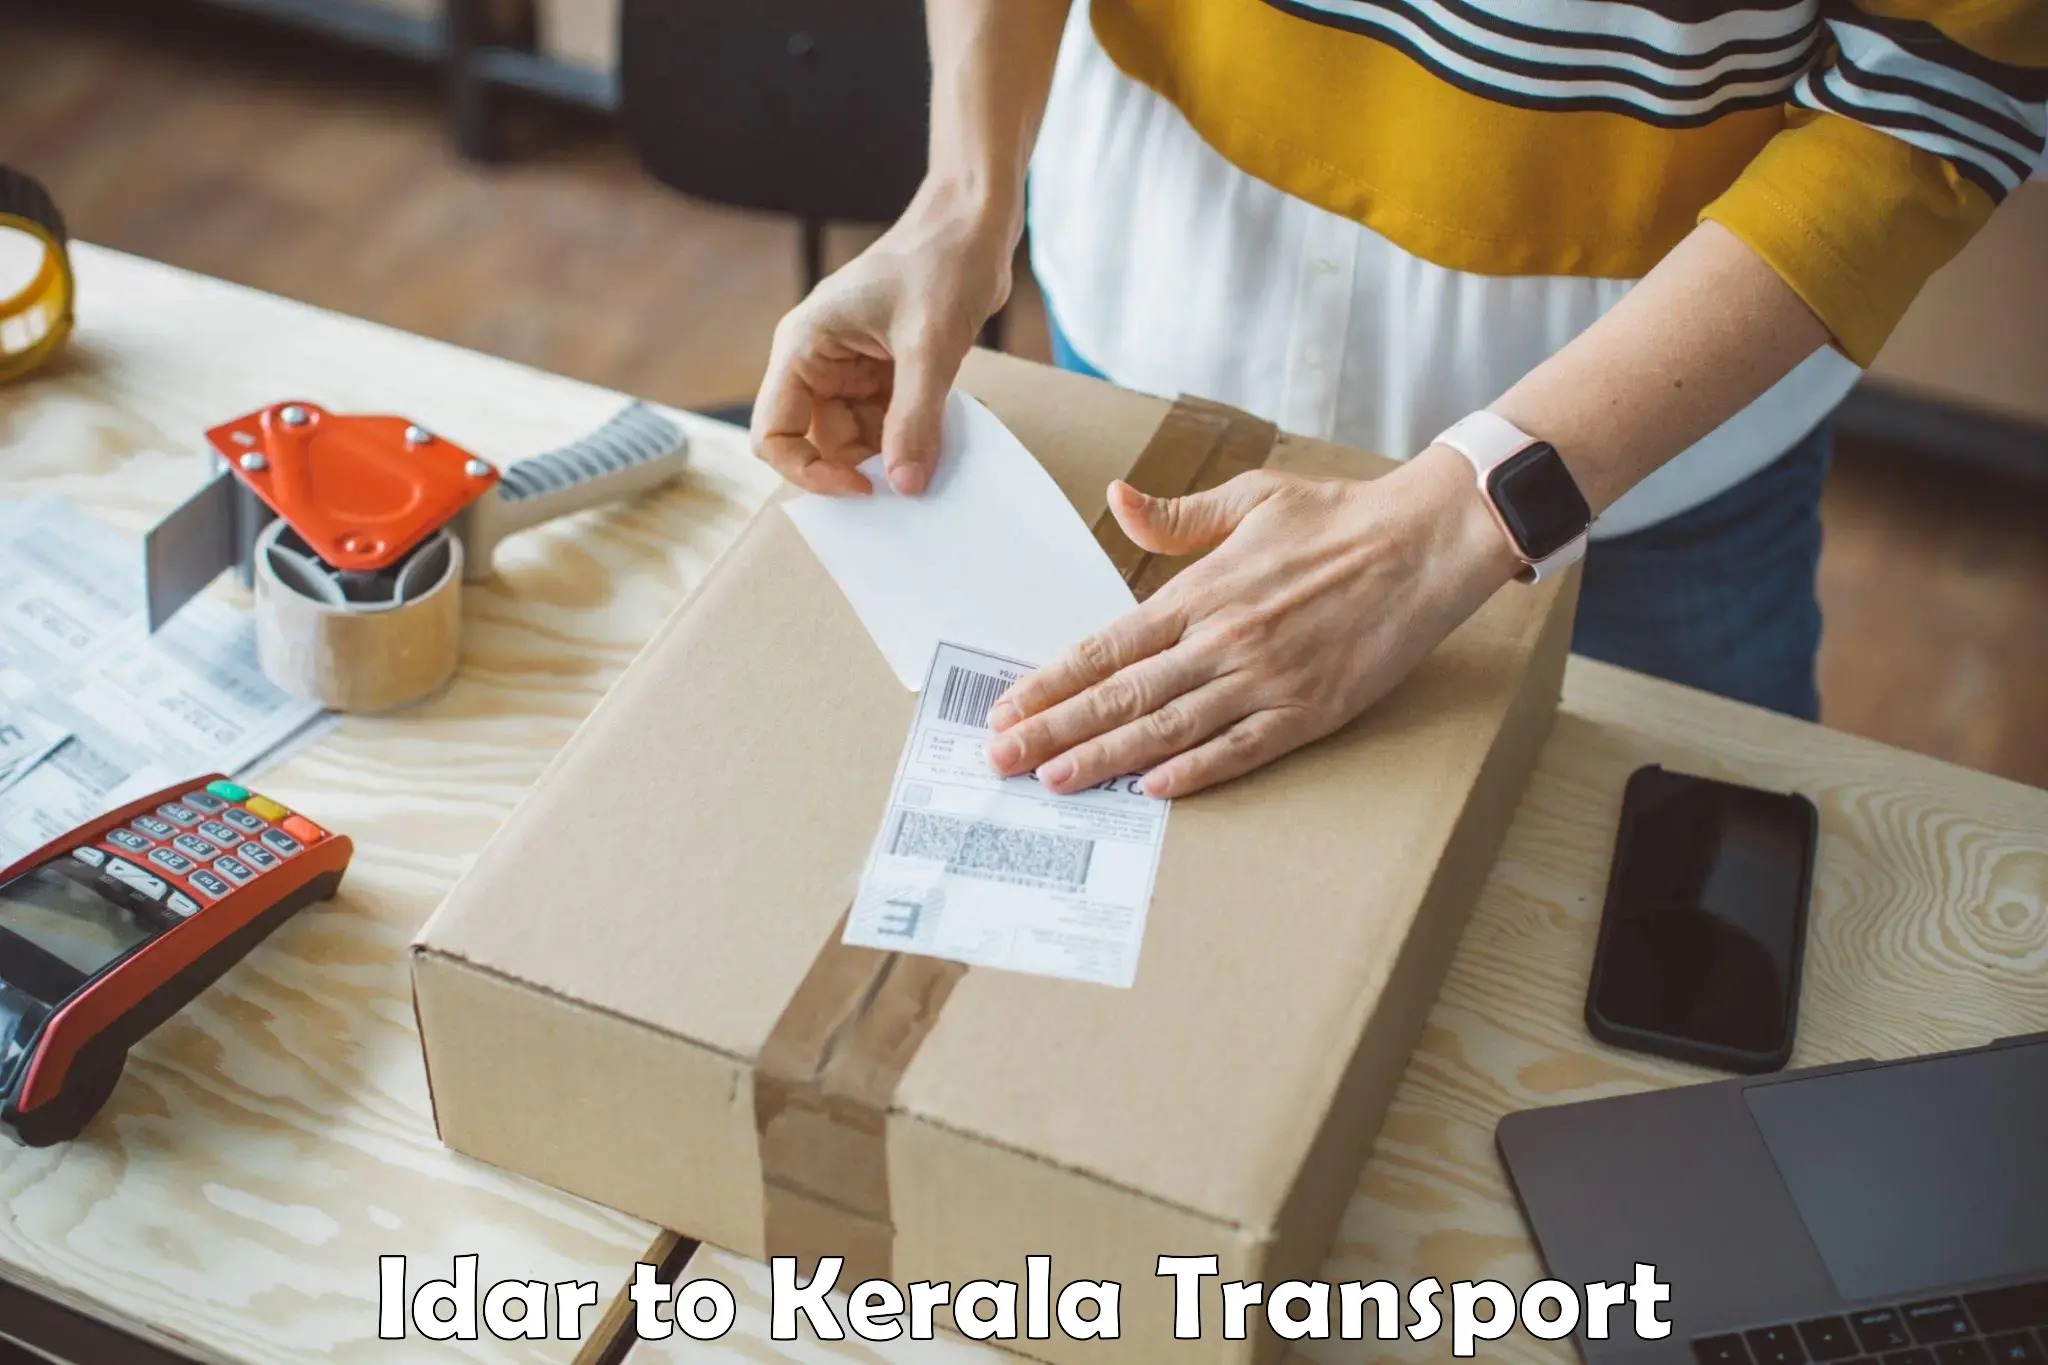 Transport shared services in Idar to Kerala